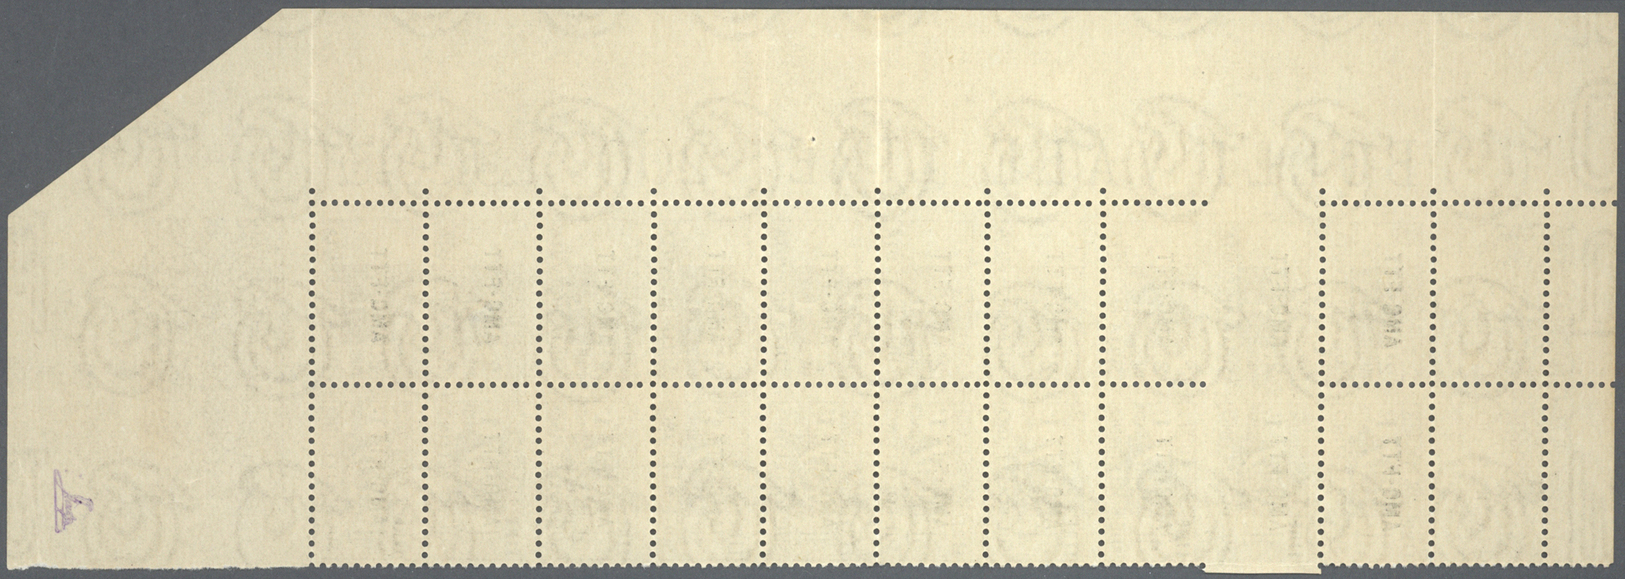 ** Triest - Zone A - Paketmarken: 1950, 1l. Bistre, Marginal Block Of Ten, Two Stamps (2nd Row From Top) IMPERFOR - Colis Postaux/concession